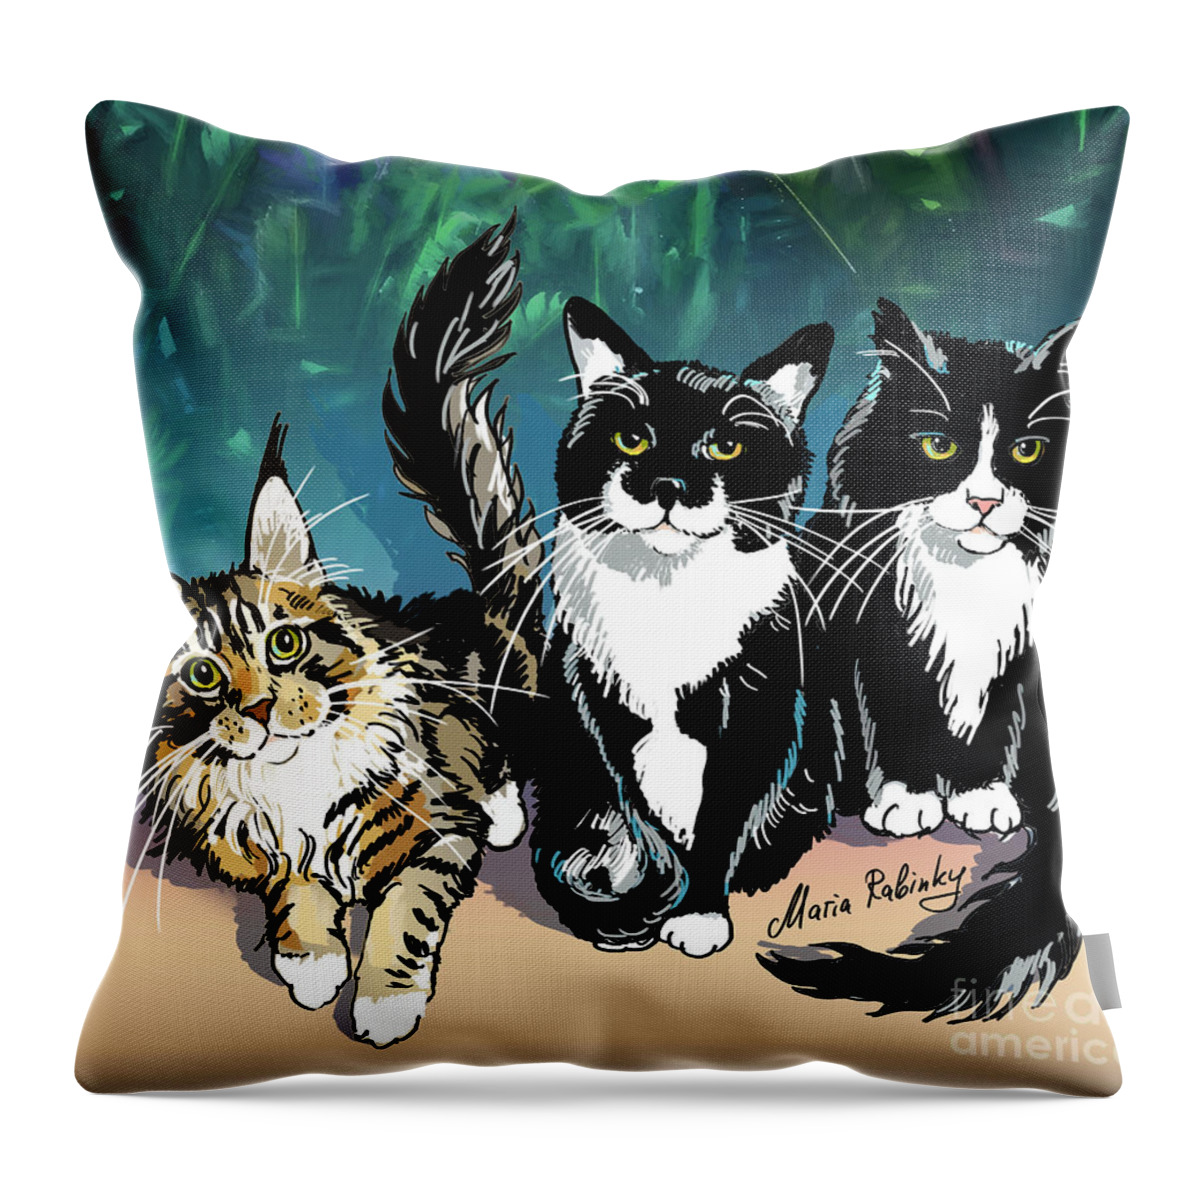 Cat Portrait Throw Pillow featuring the digital art Cats by Maria Rabinky